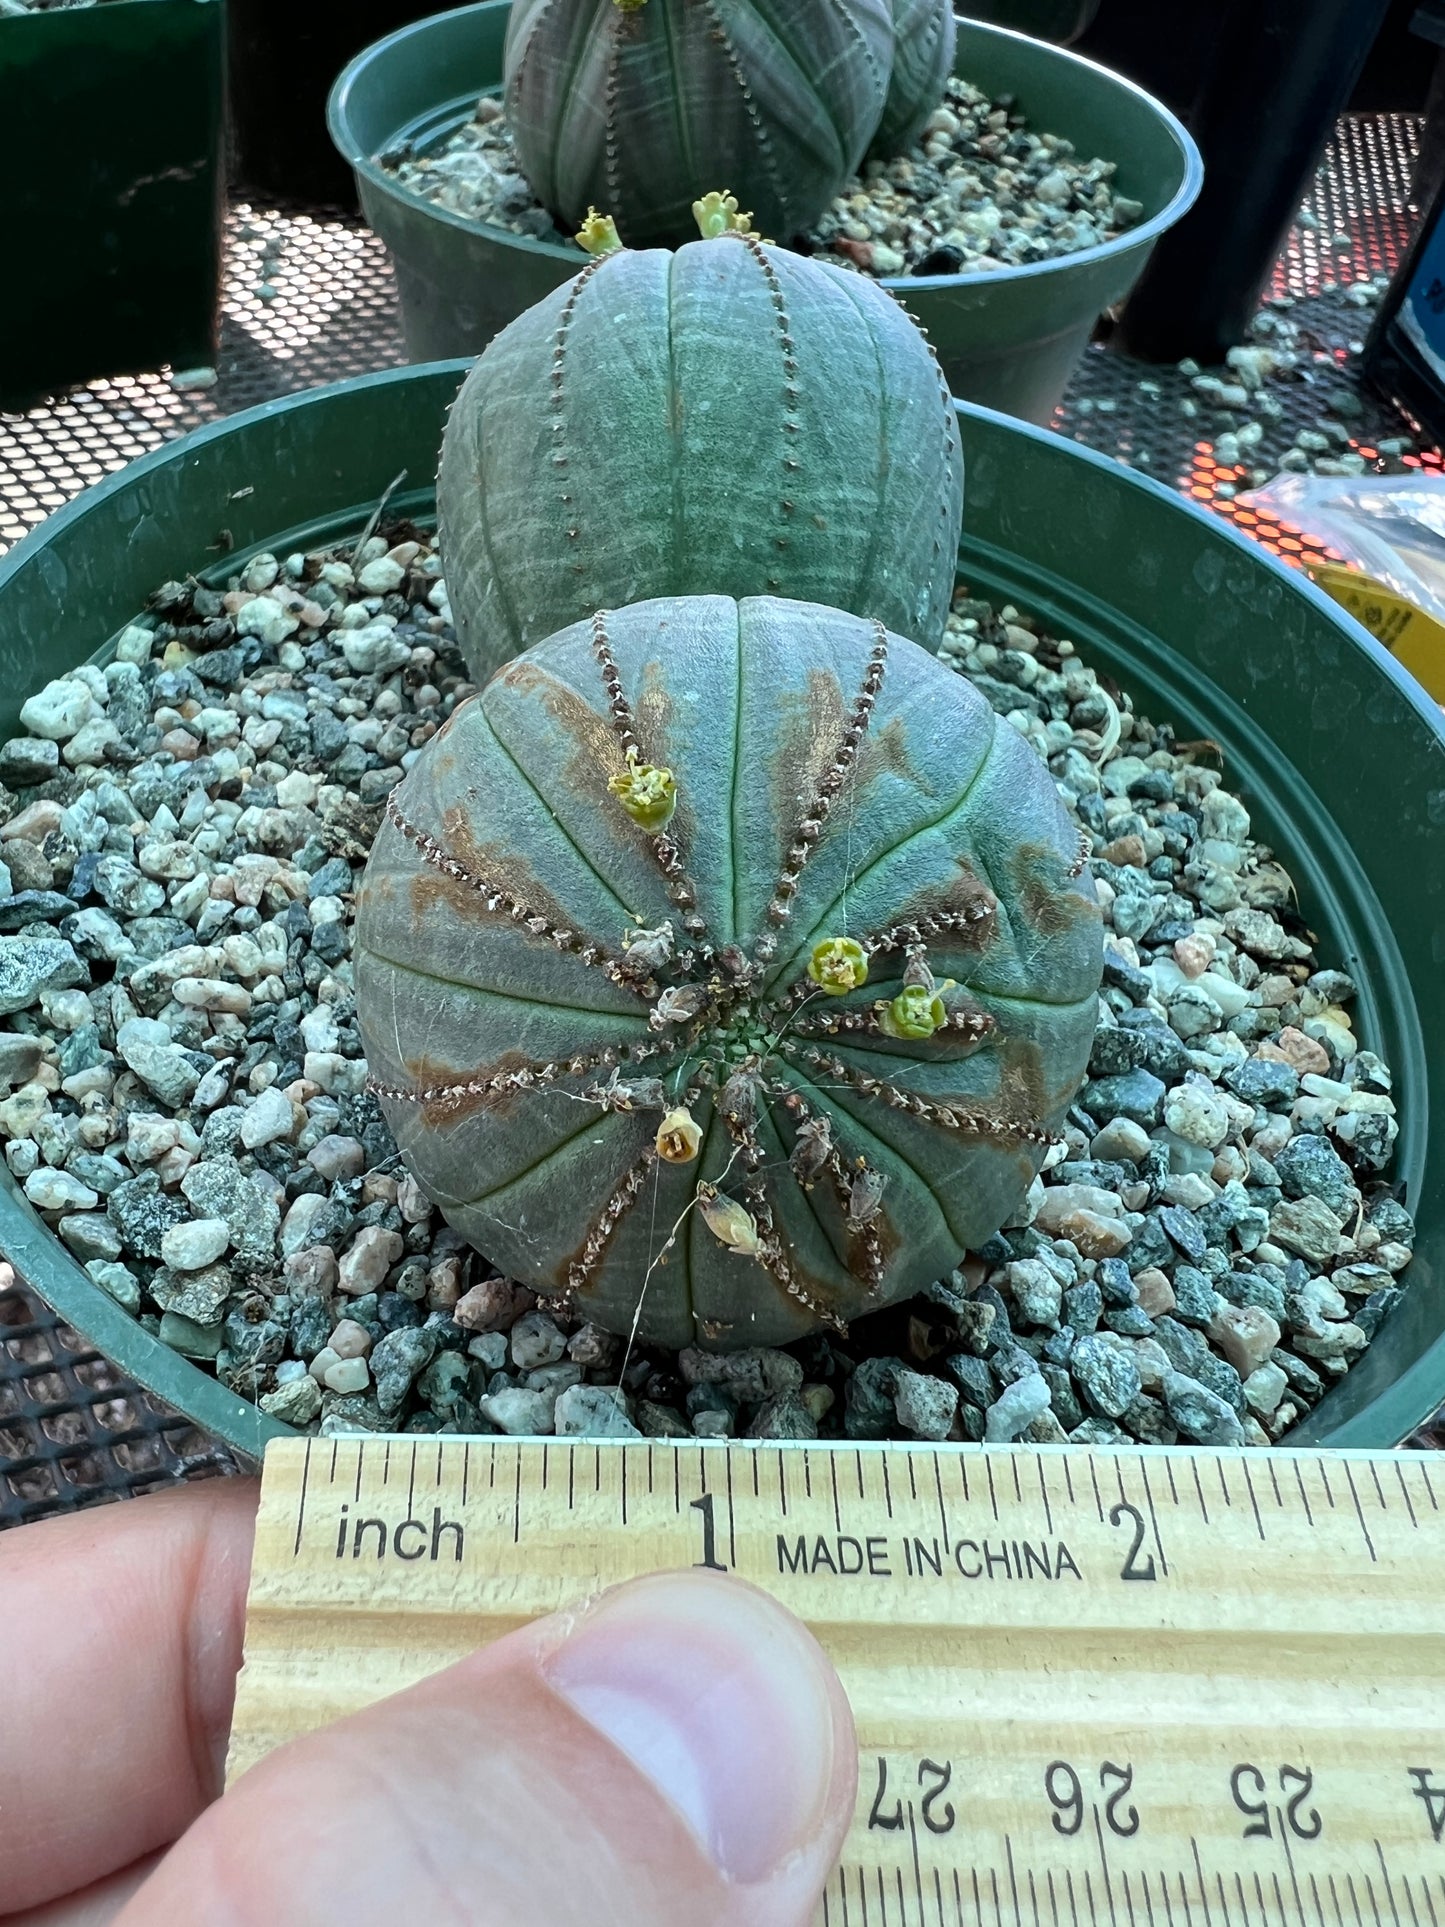 Euphorbia obesa two headed plant, has some marks on one head